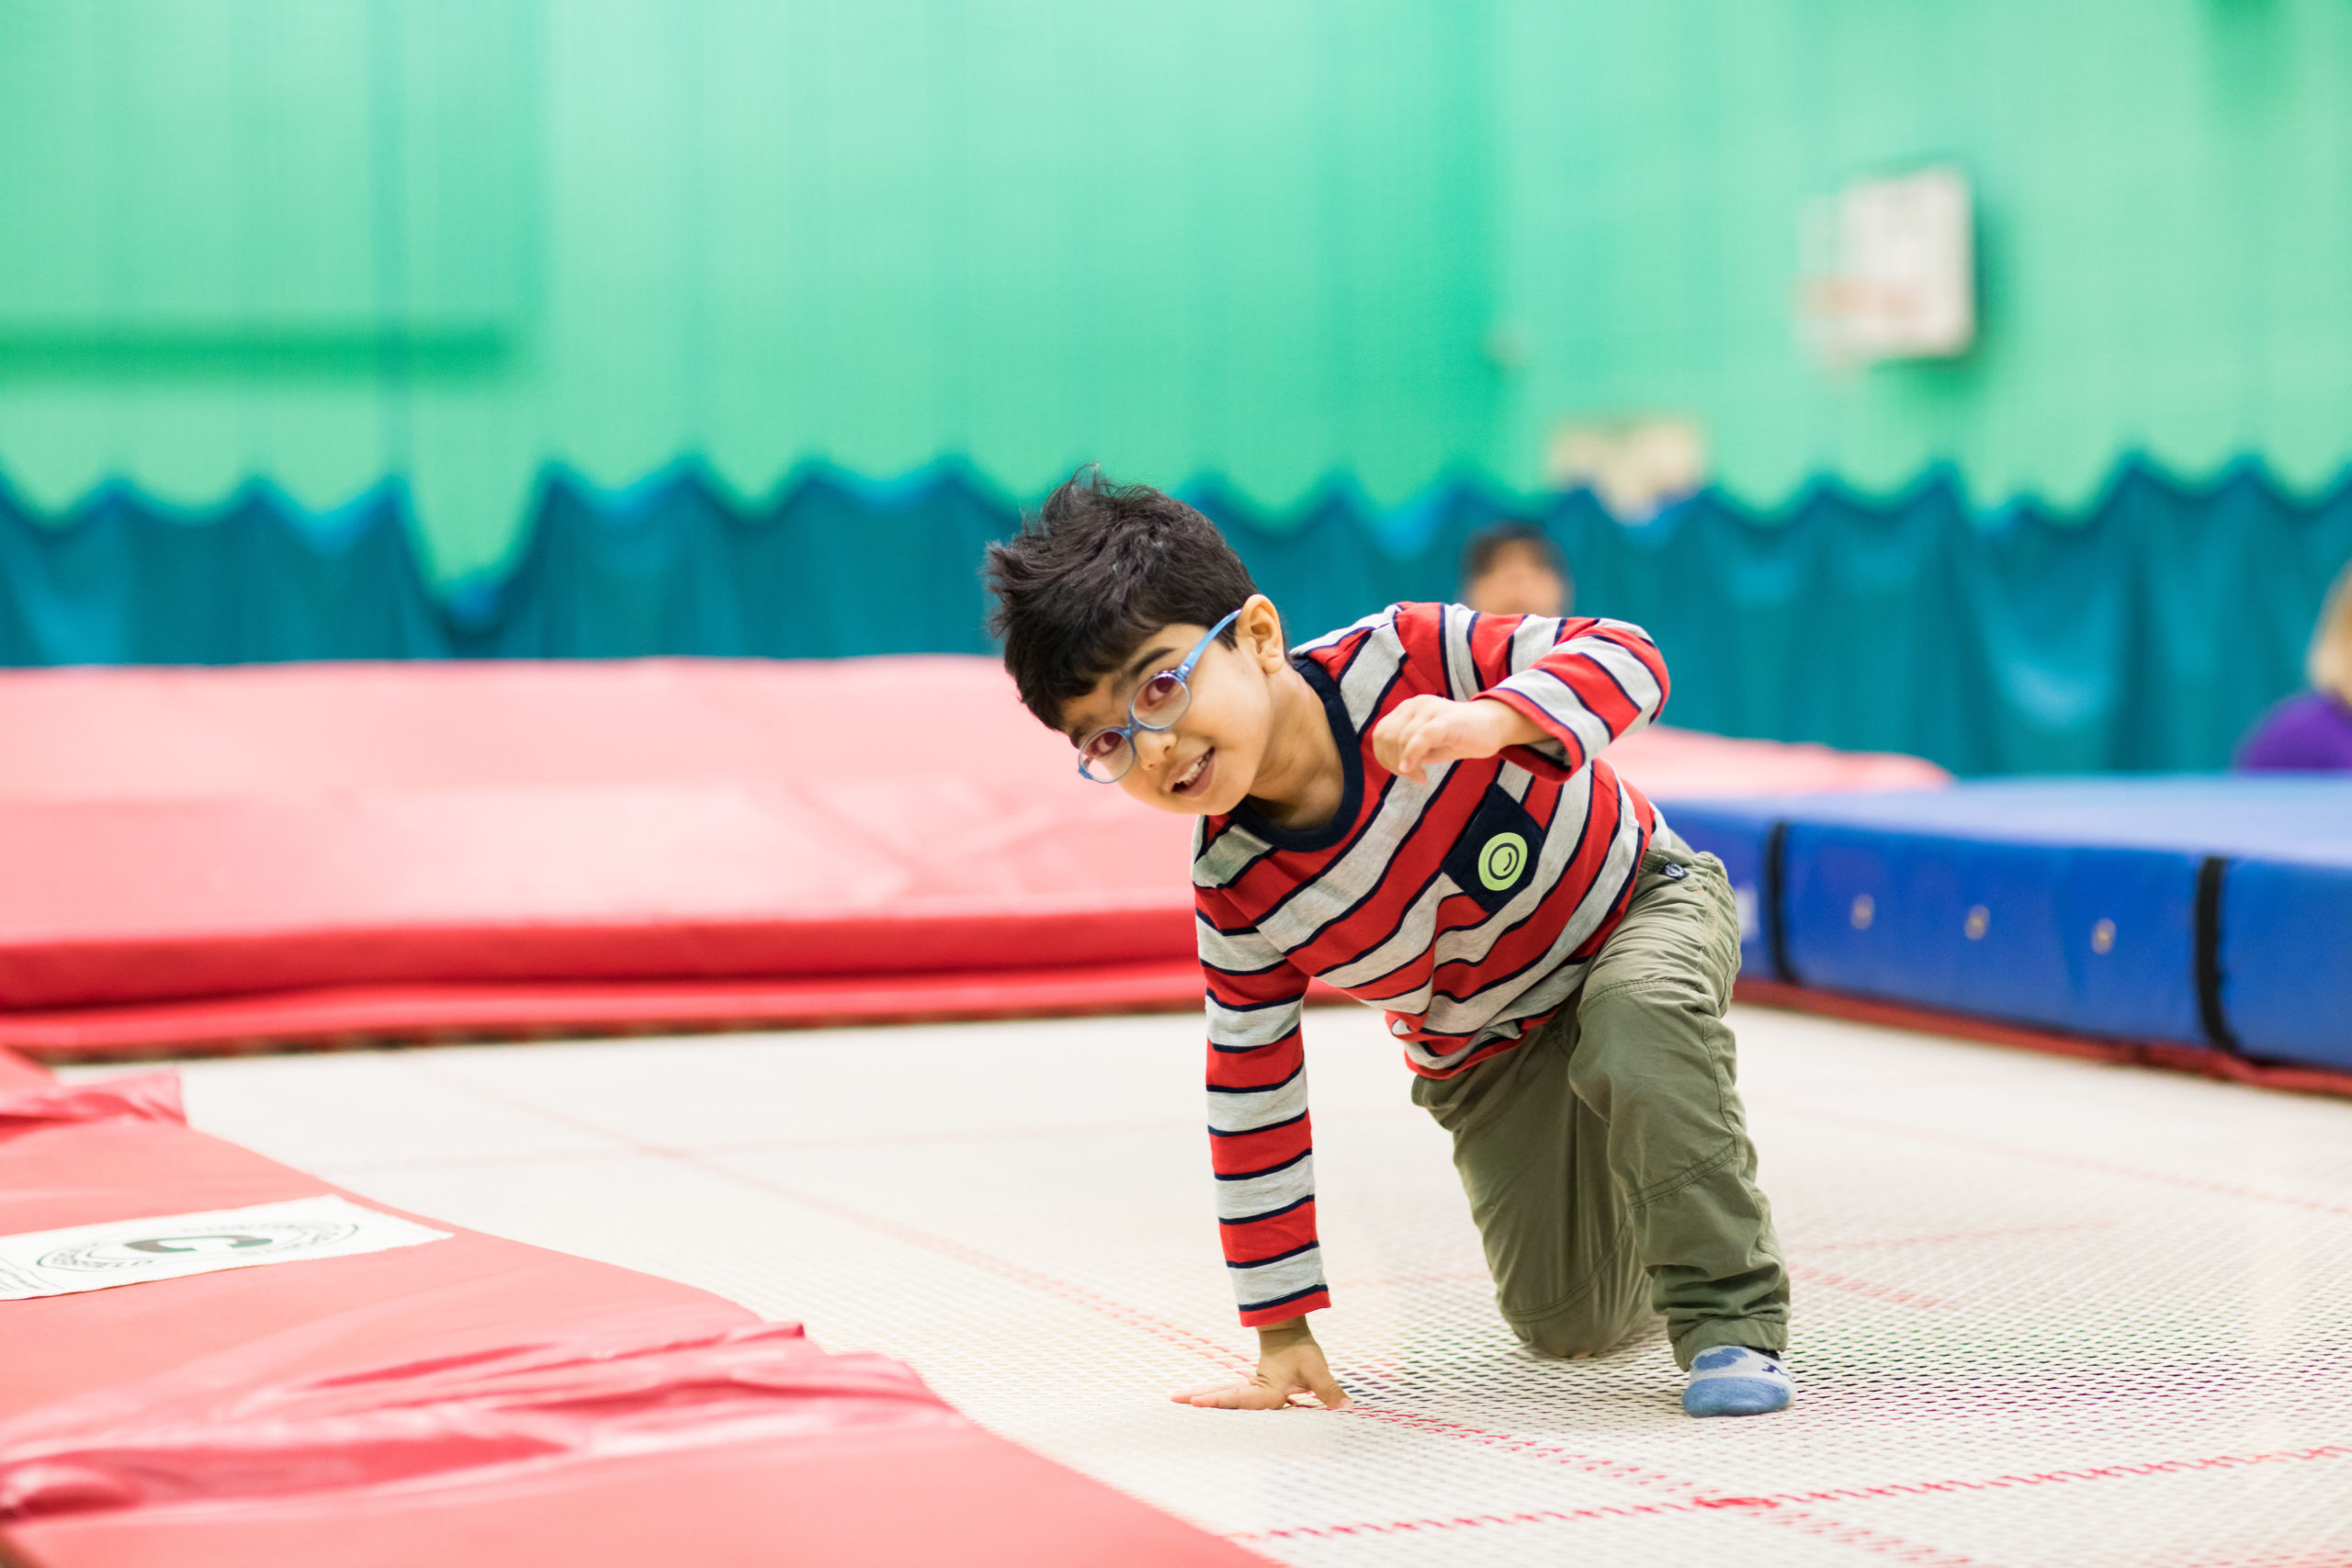 HemiHelp event - boy wearing glasses and stripy top, standing on trampoline